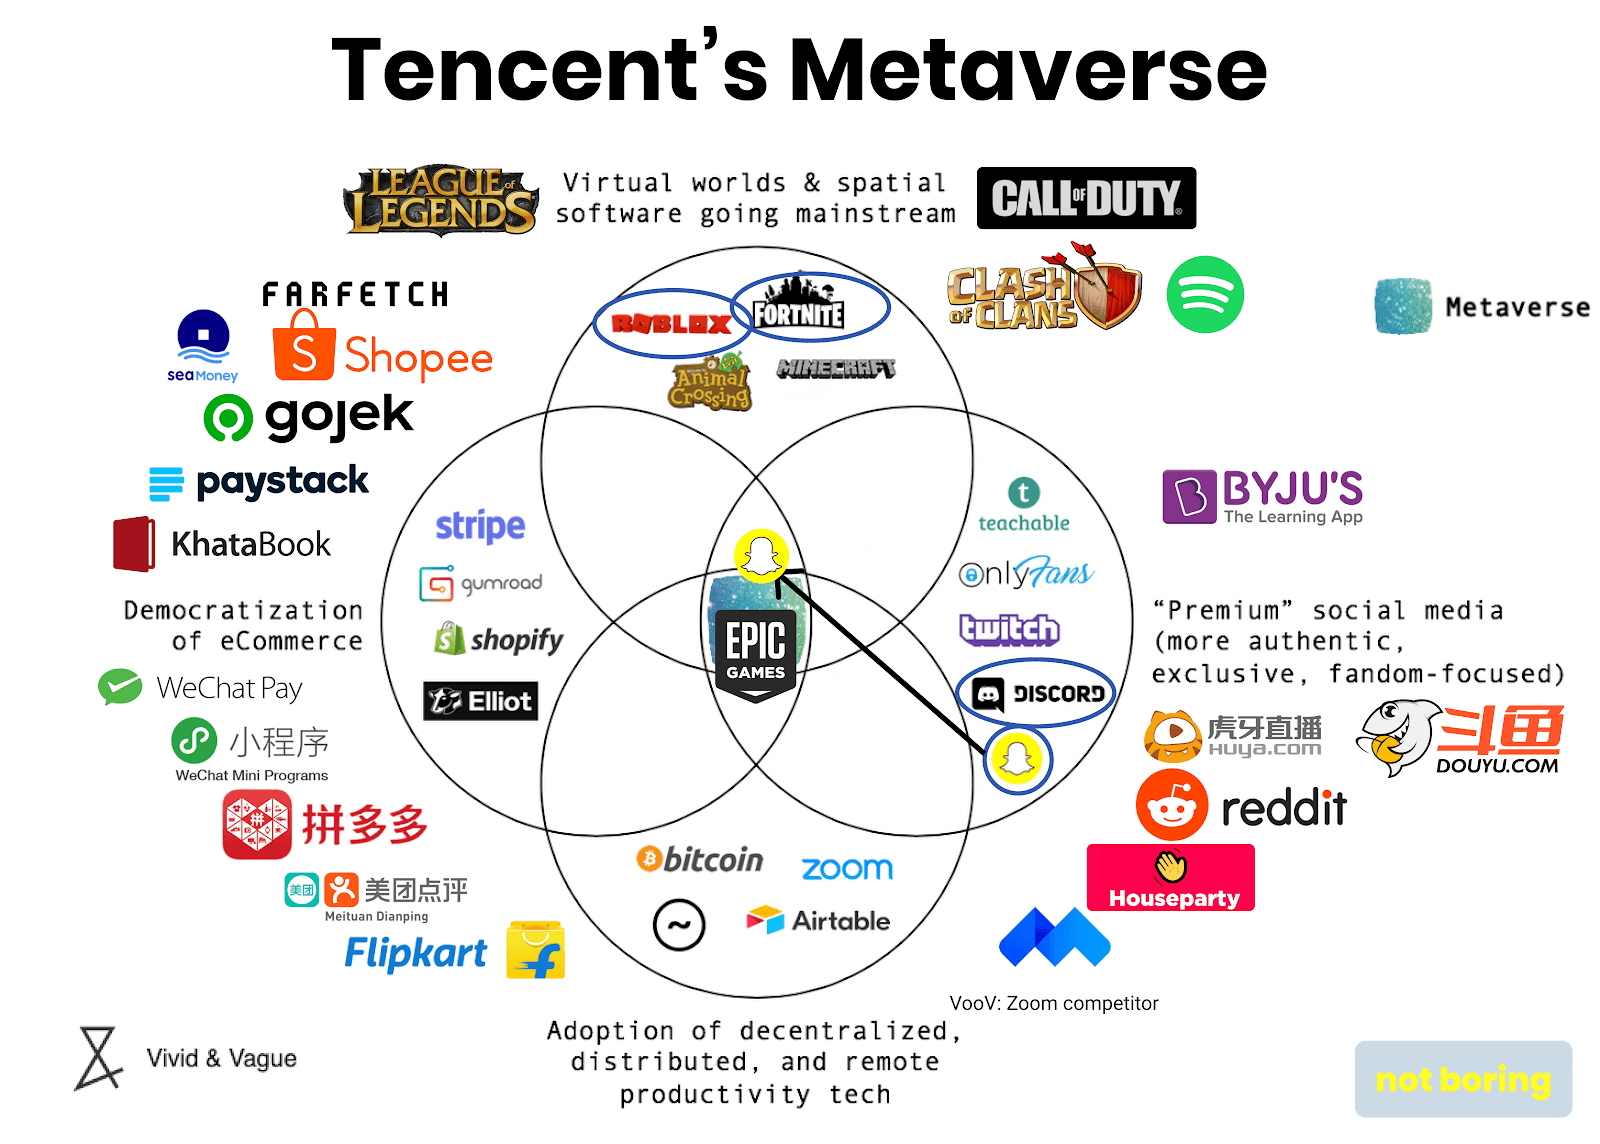 Tencent S Dreams Part Ii Investing In The Metaverse Otcmkts Tcehy Seeking Alpha - roblox 1 18 2020 11 01 33 pm